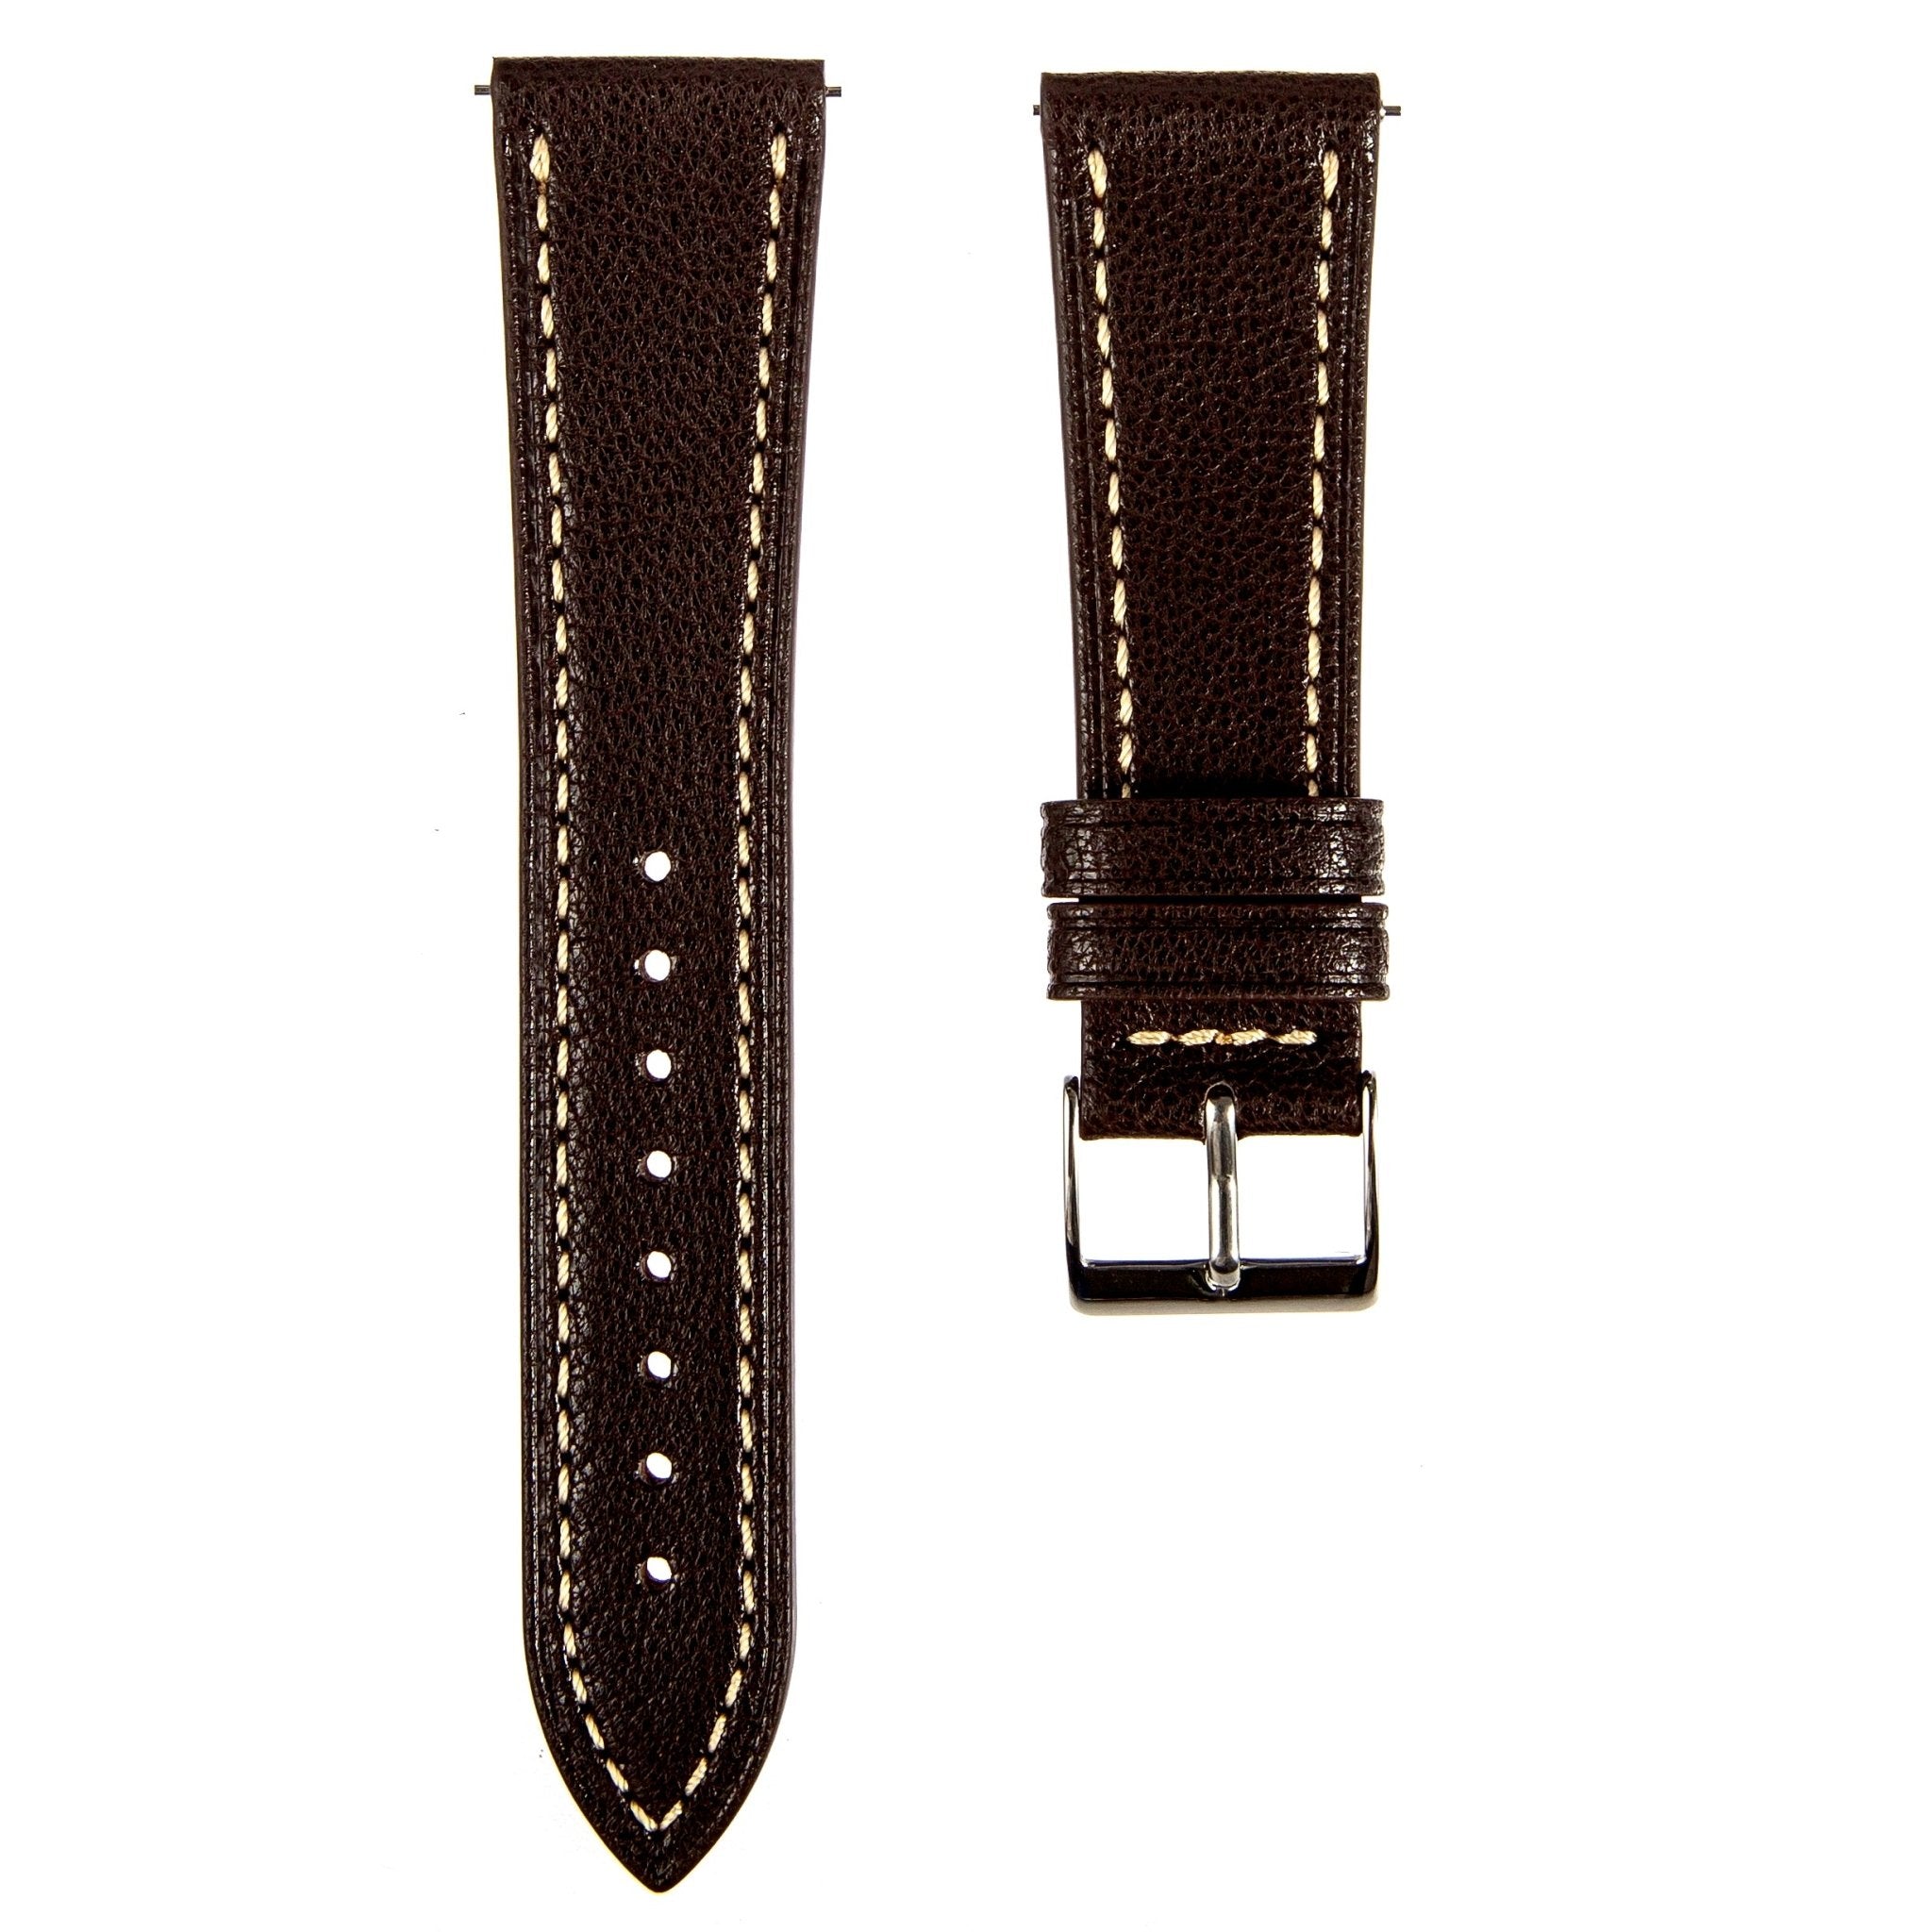 Sully Chevre Leather Strap - Quick-Release - Coffee Brown (2428) -StrapSeeker